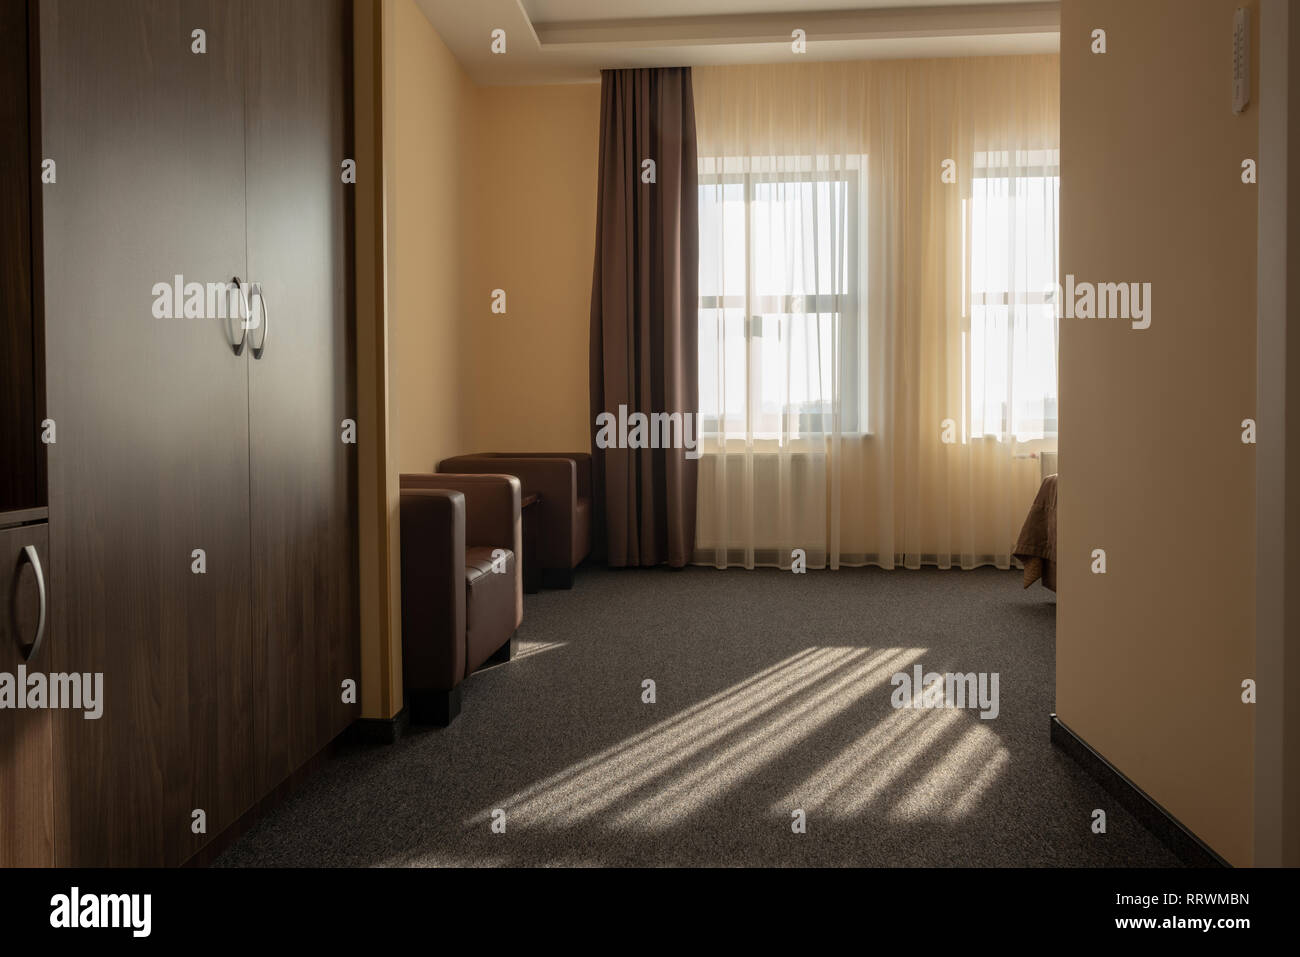 hotel room interior with wardrobe, armchairs and window Stock Photo